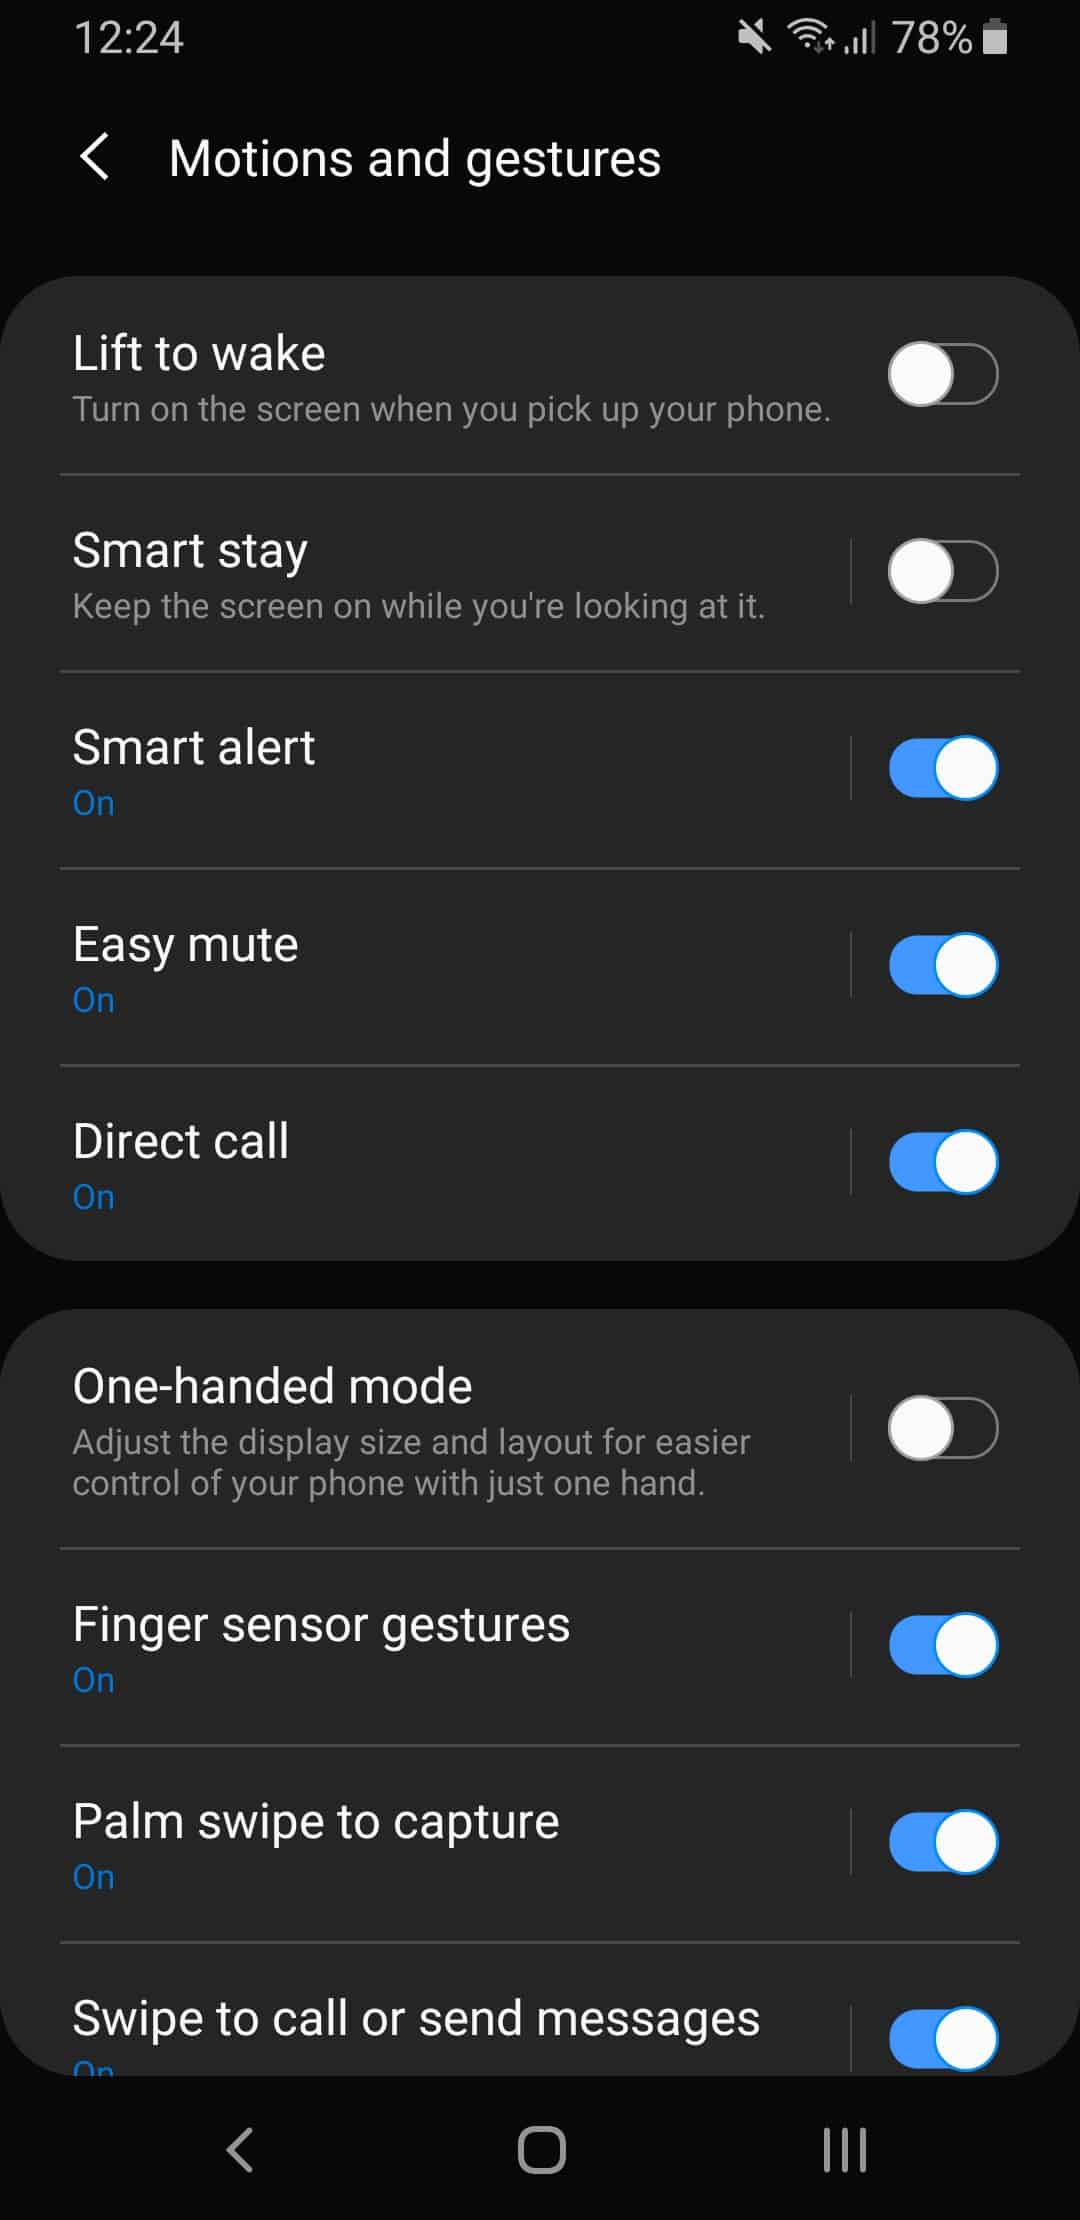 The motions and gestures settings menu in Samsung One UI.